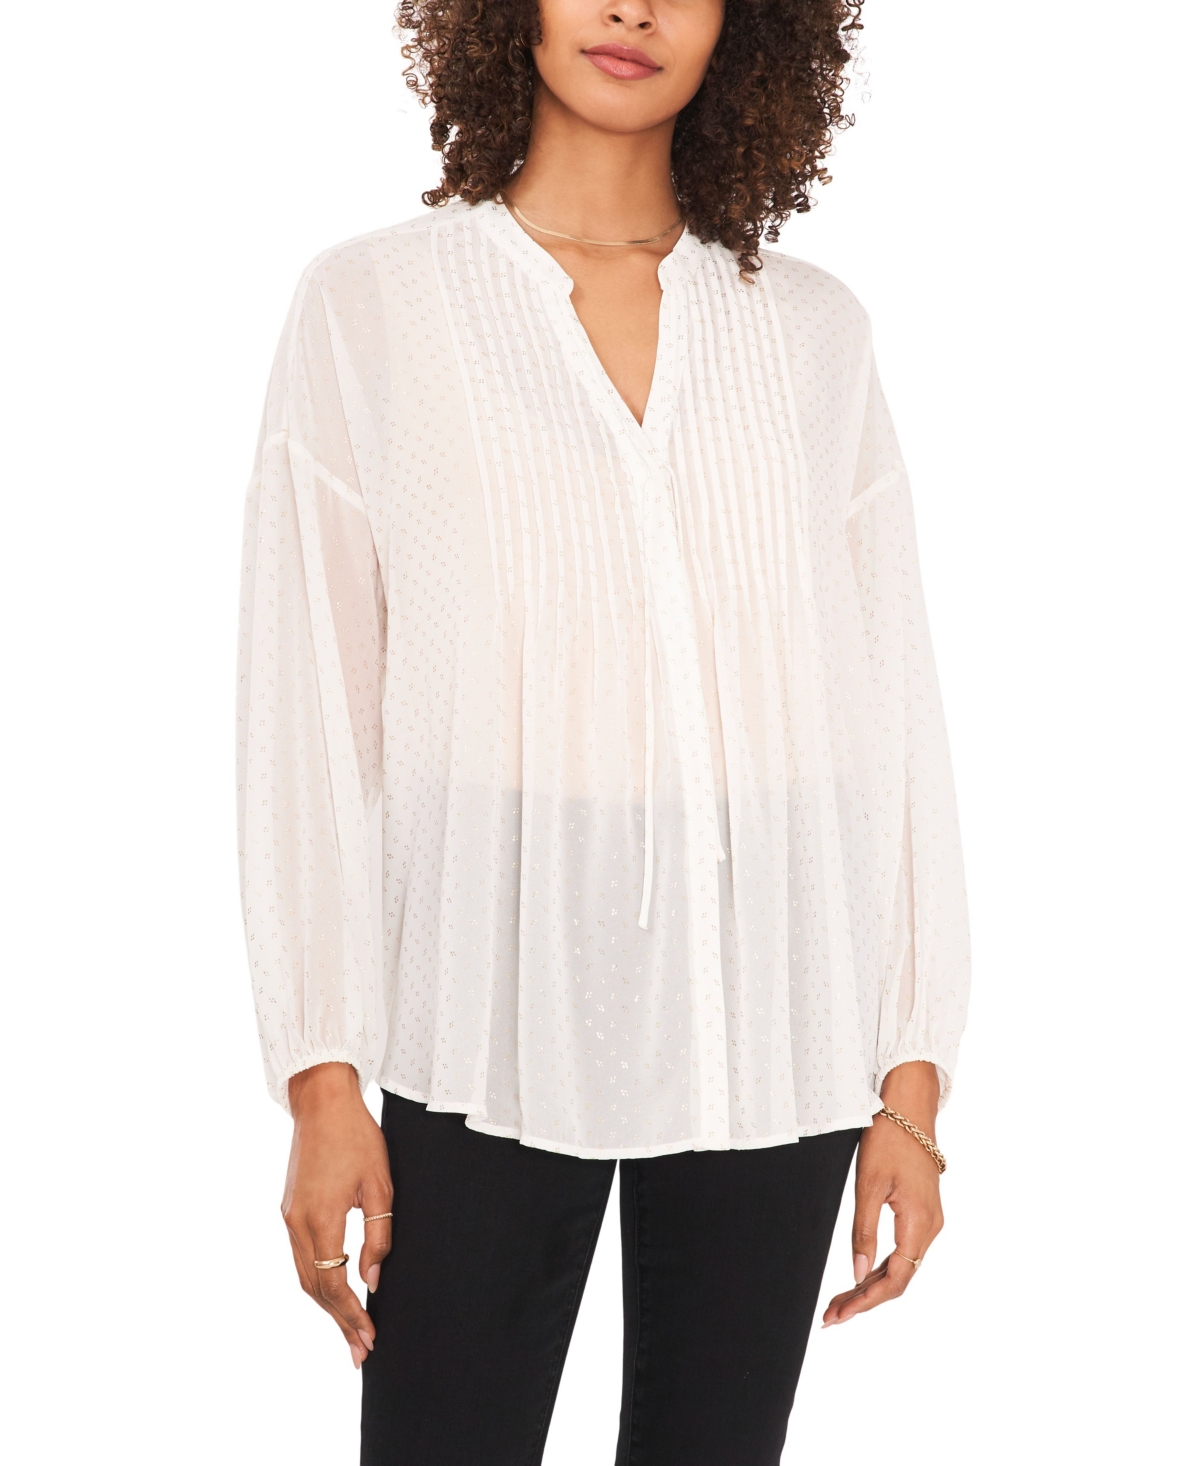 Vince Camuto Women's Drop Shoulder Blouse with Pin tucks